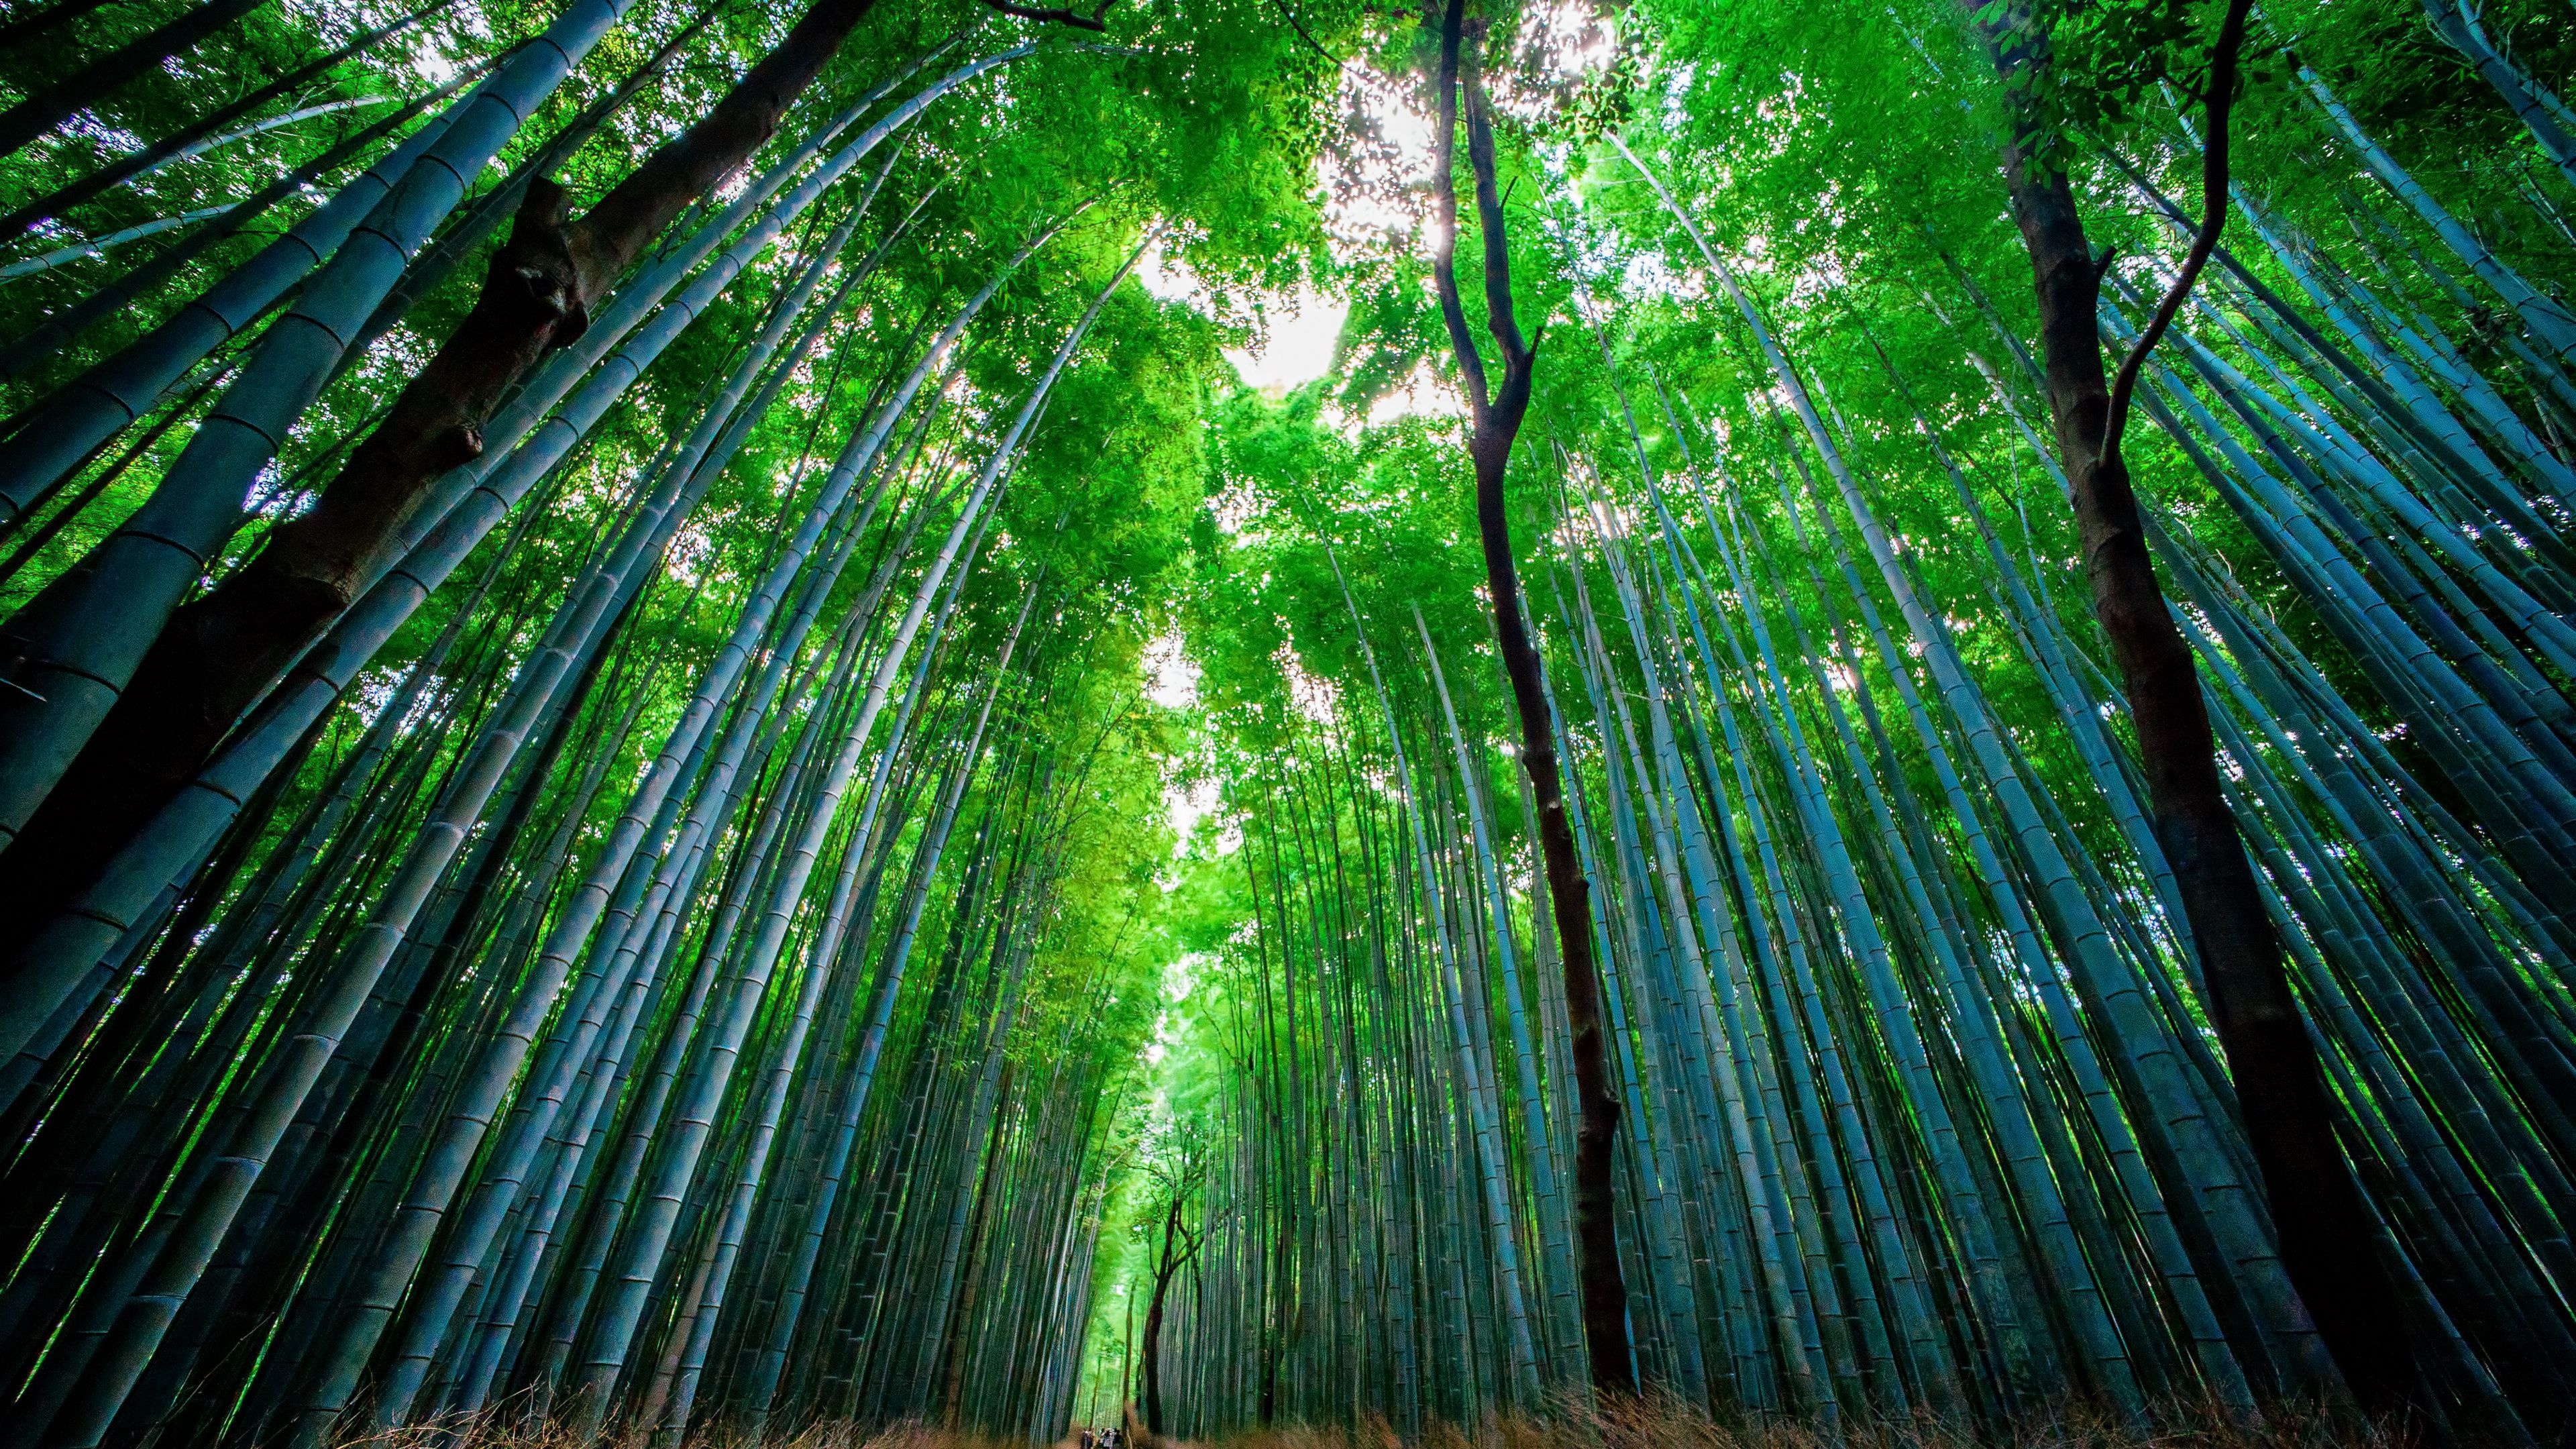 Bamboo forest in 4k, Nature's beauty, Tranquil scenery, Serene greenery, 3840x2160 4K Desktop